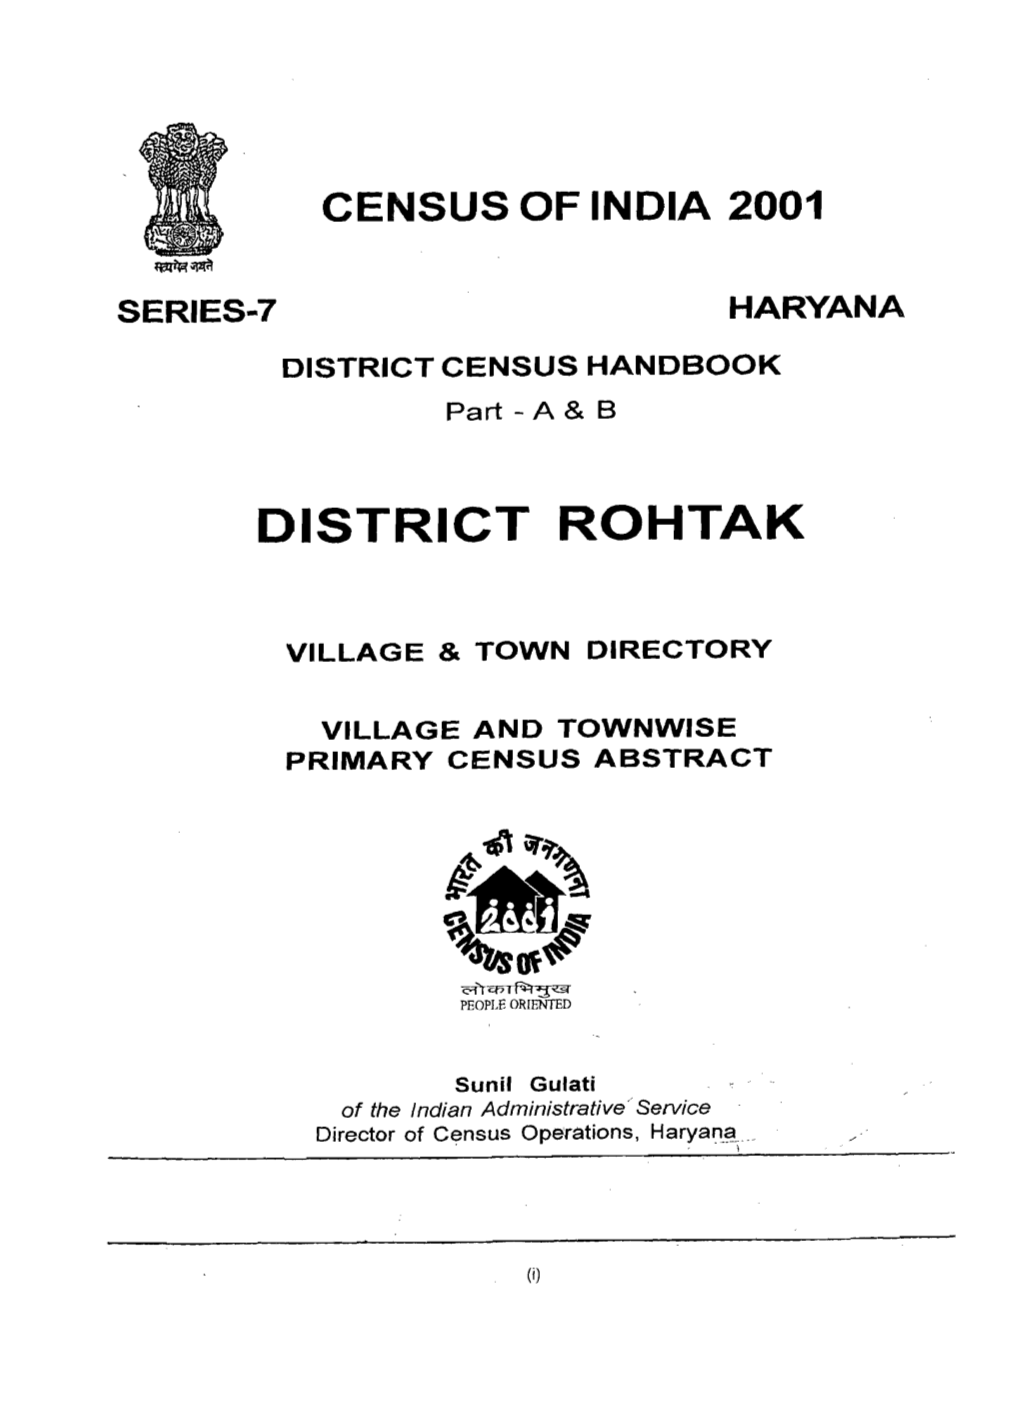 Village and Townwise Primary Census Abstract, Rohtak, Part